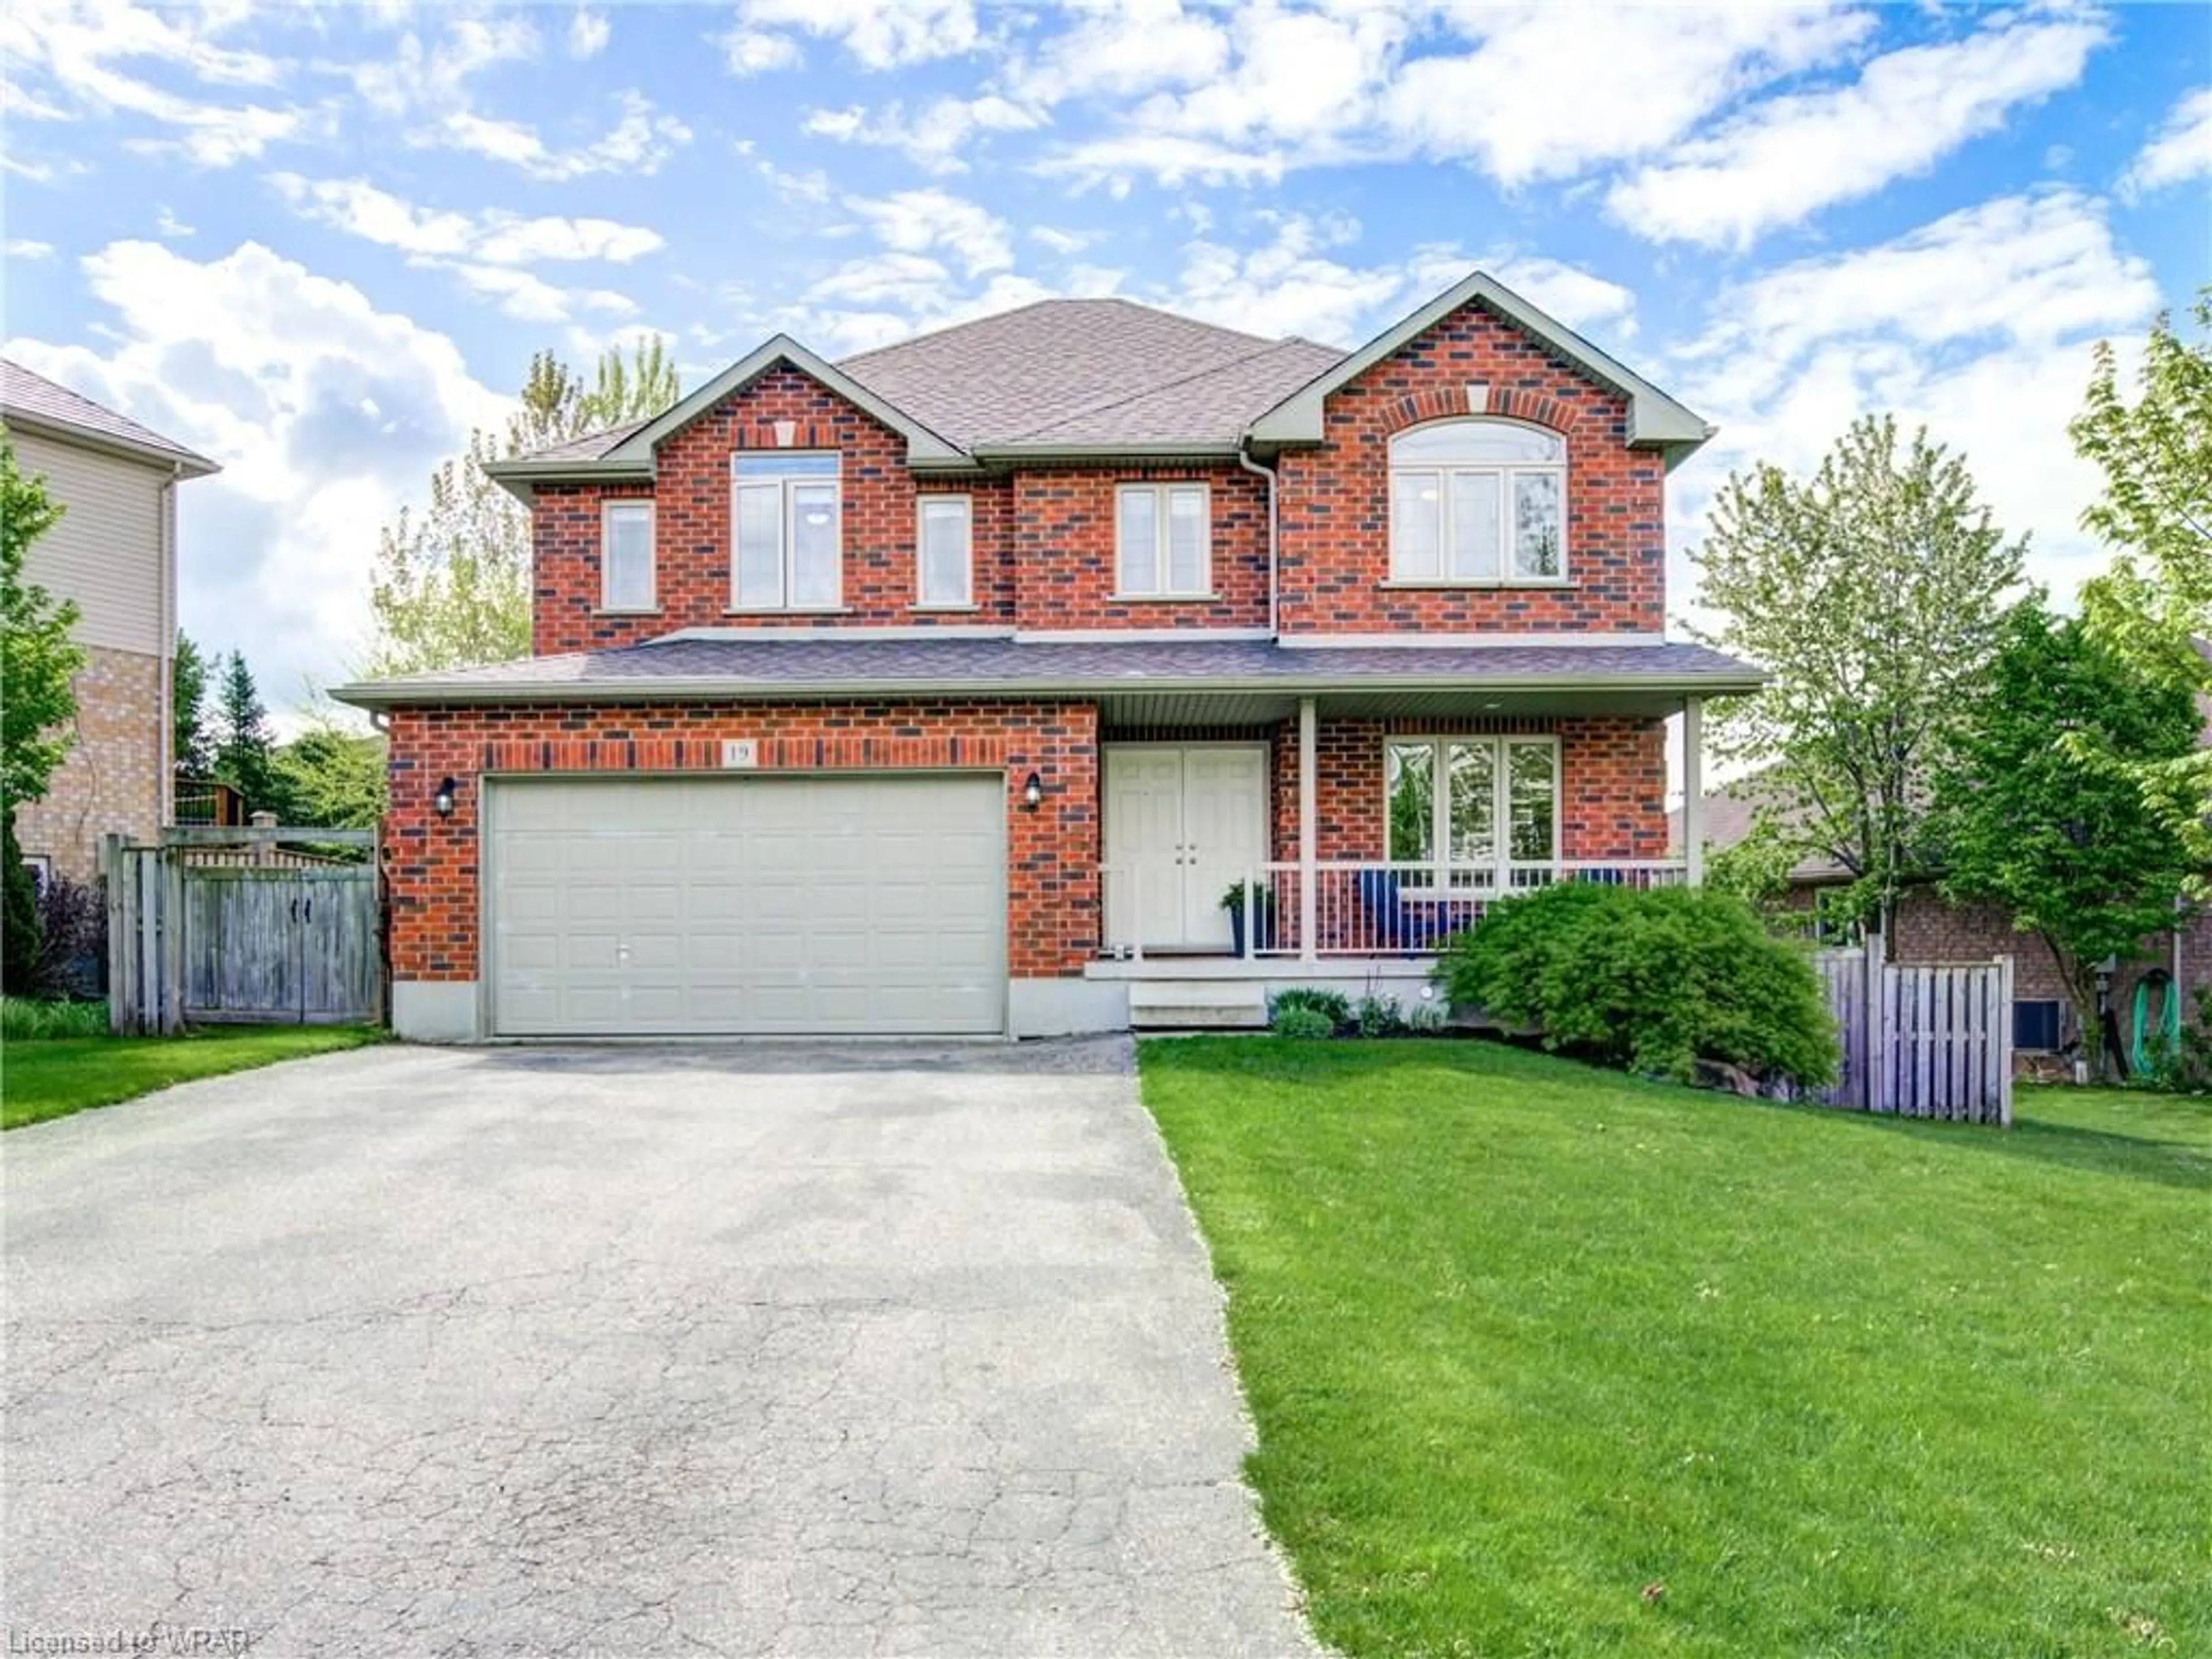 Home with brick exterior material for 19 Firella Pl, Wellesley Ontario N0B 2T0